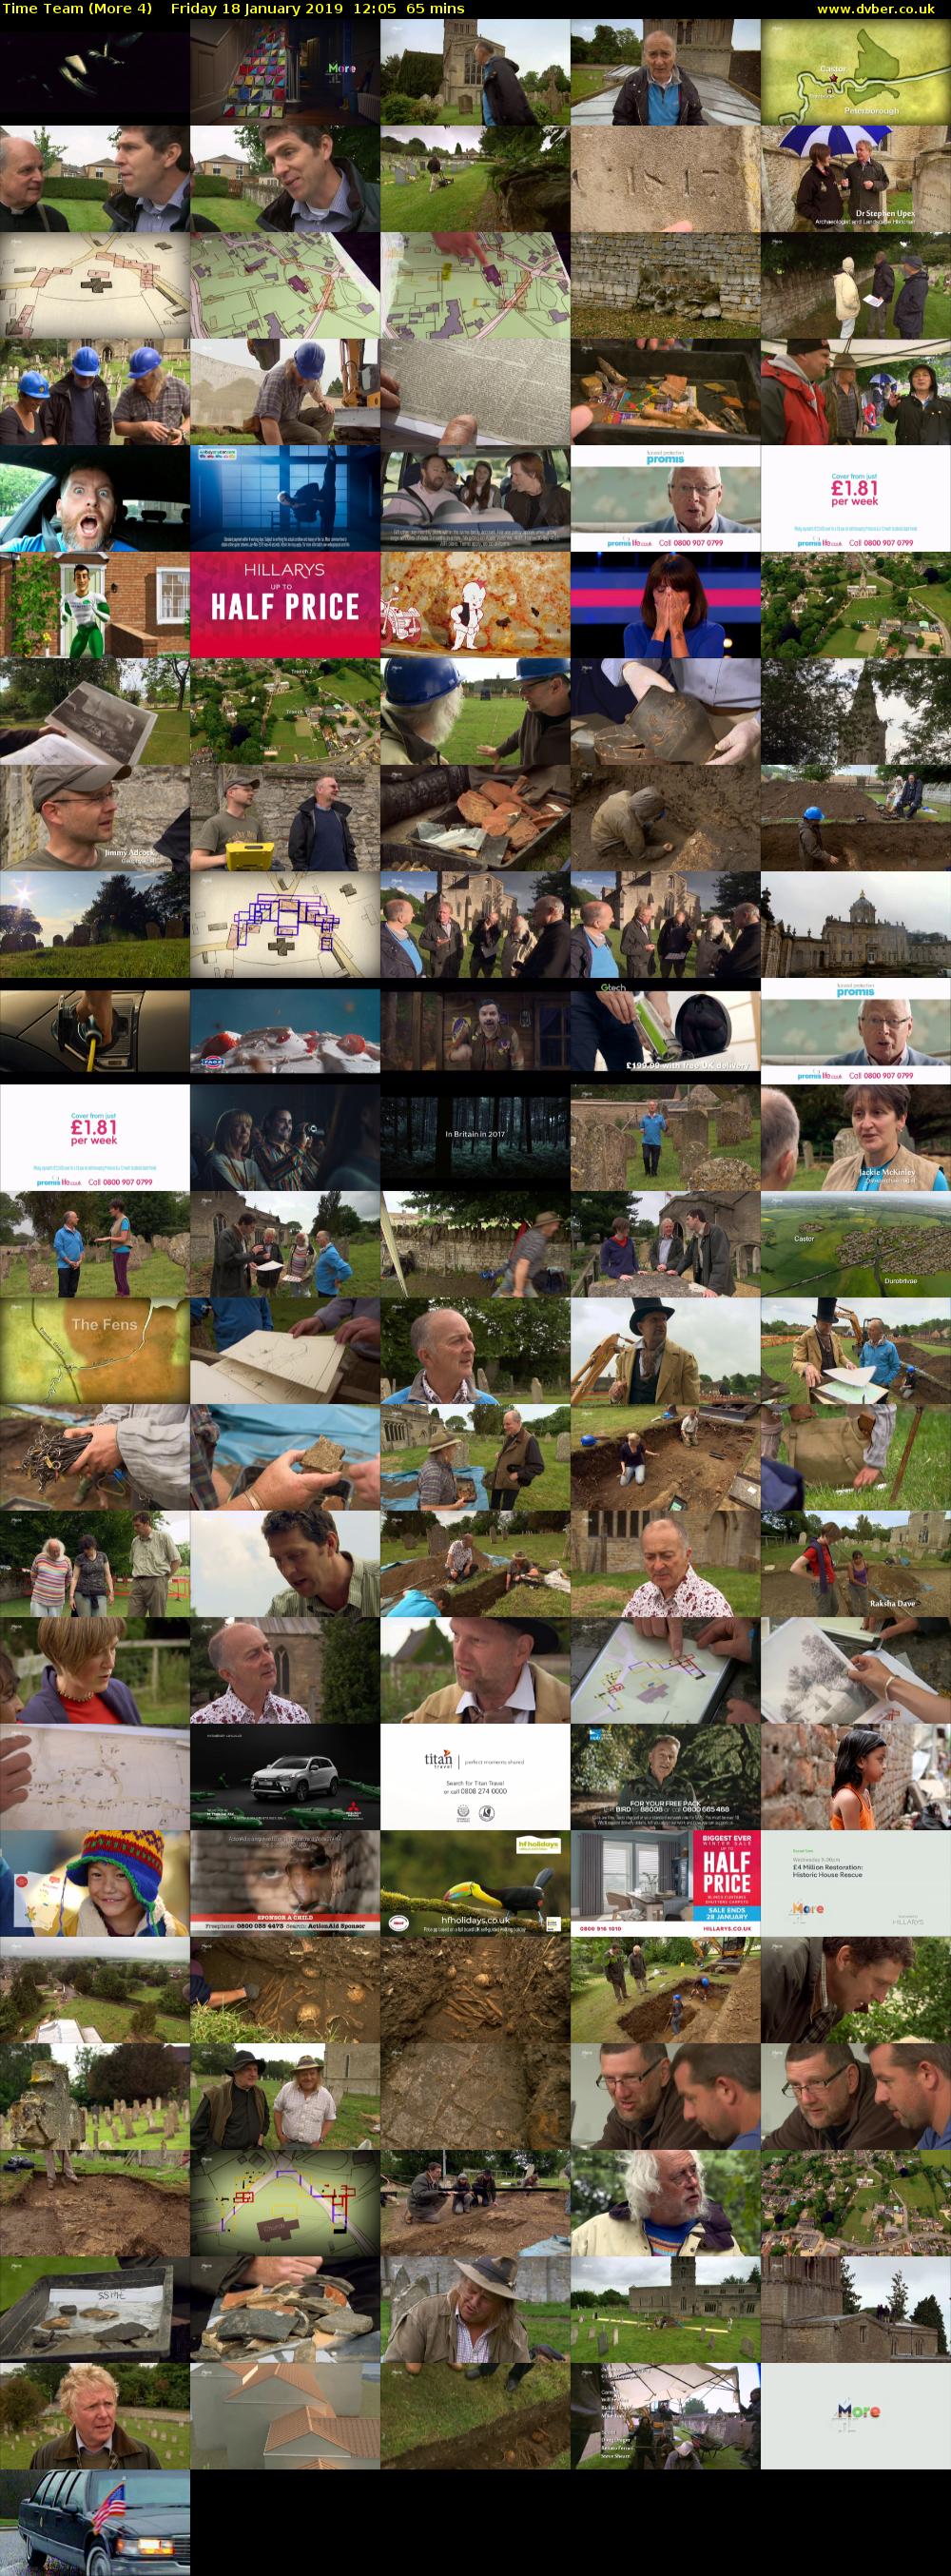 Time Team (More 4) Friday 18 January 2019 12:05 - 13:10